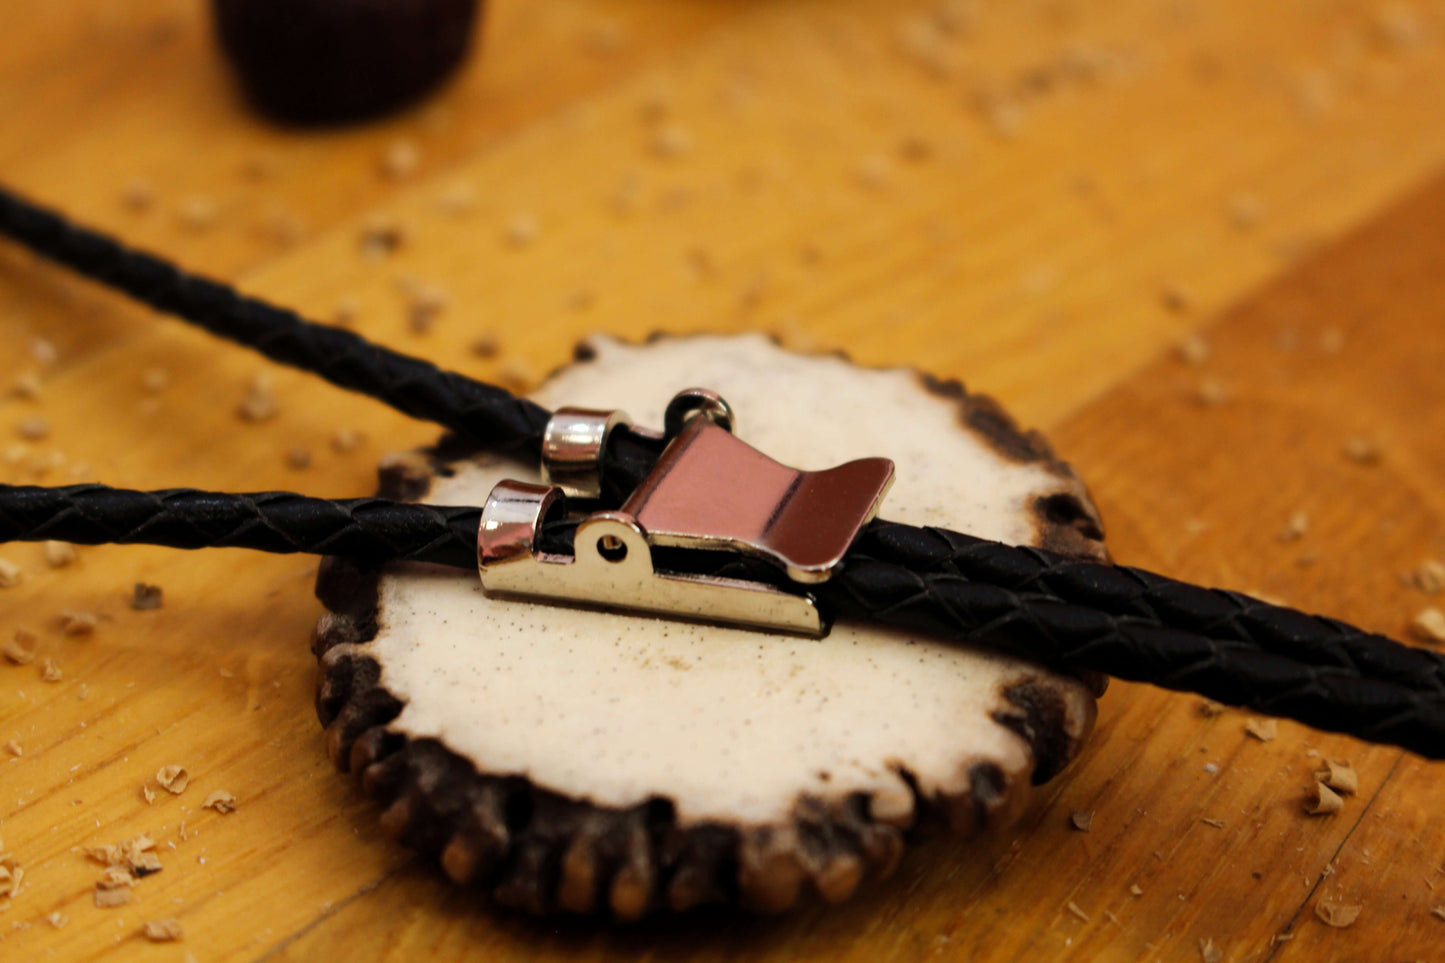 Size adjustment mechanism of Bolo Tie with leather cord